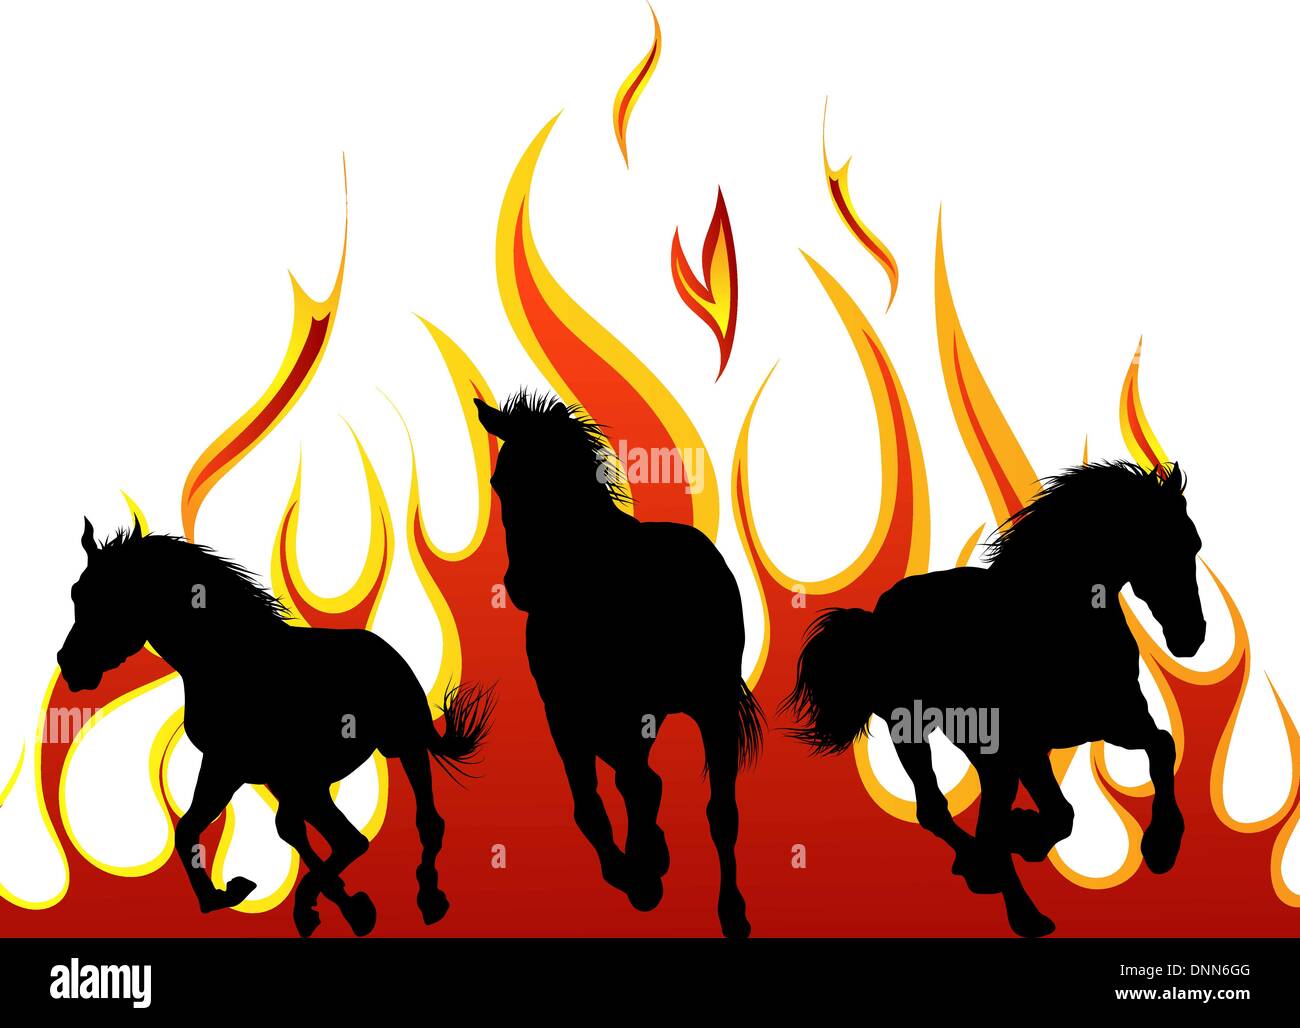 Horse silhouettes with flame tongues. Vector illustration. Stock Vector